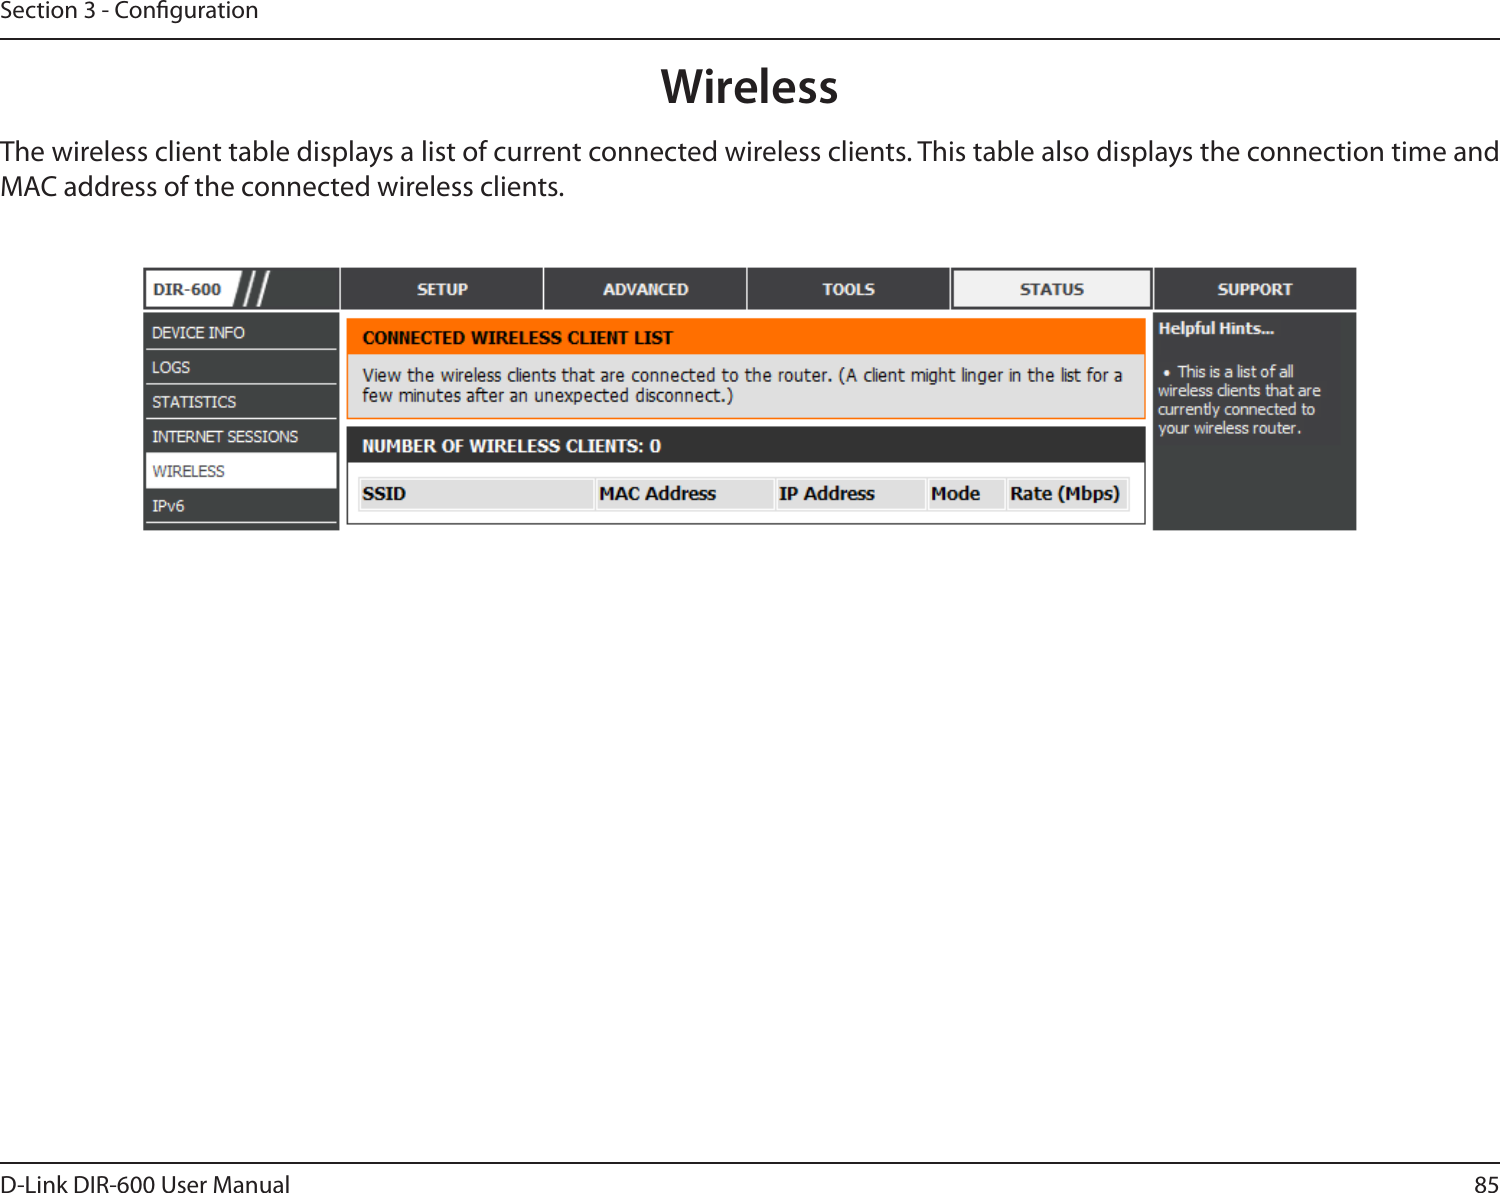 85D-Link DIR-600 User ManualSection 3 - CongurationThe wireless client table displays a list of current connected wireless clients. This table also displays the connection time and MAC address of the connected wireless clients.Wireless